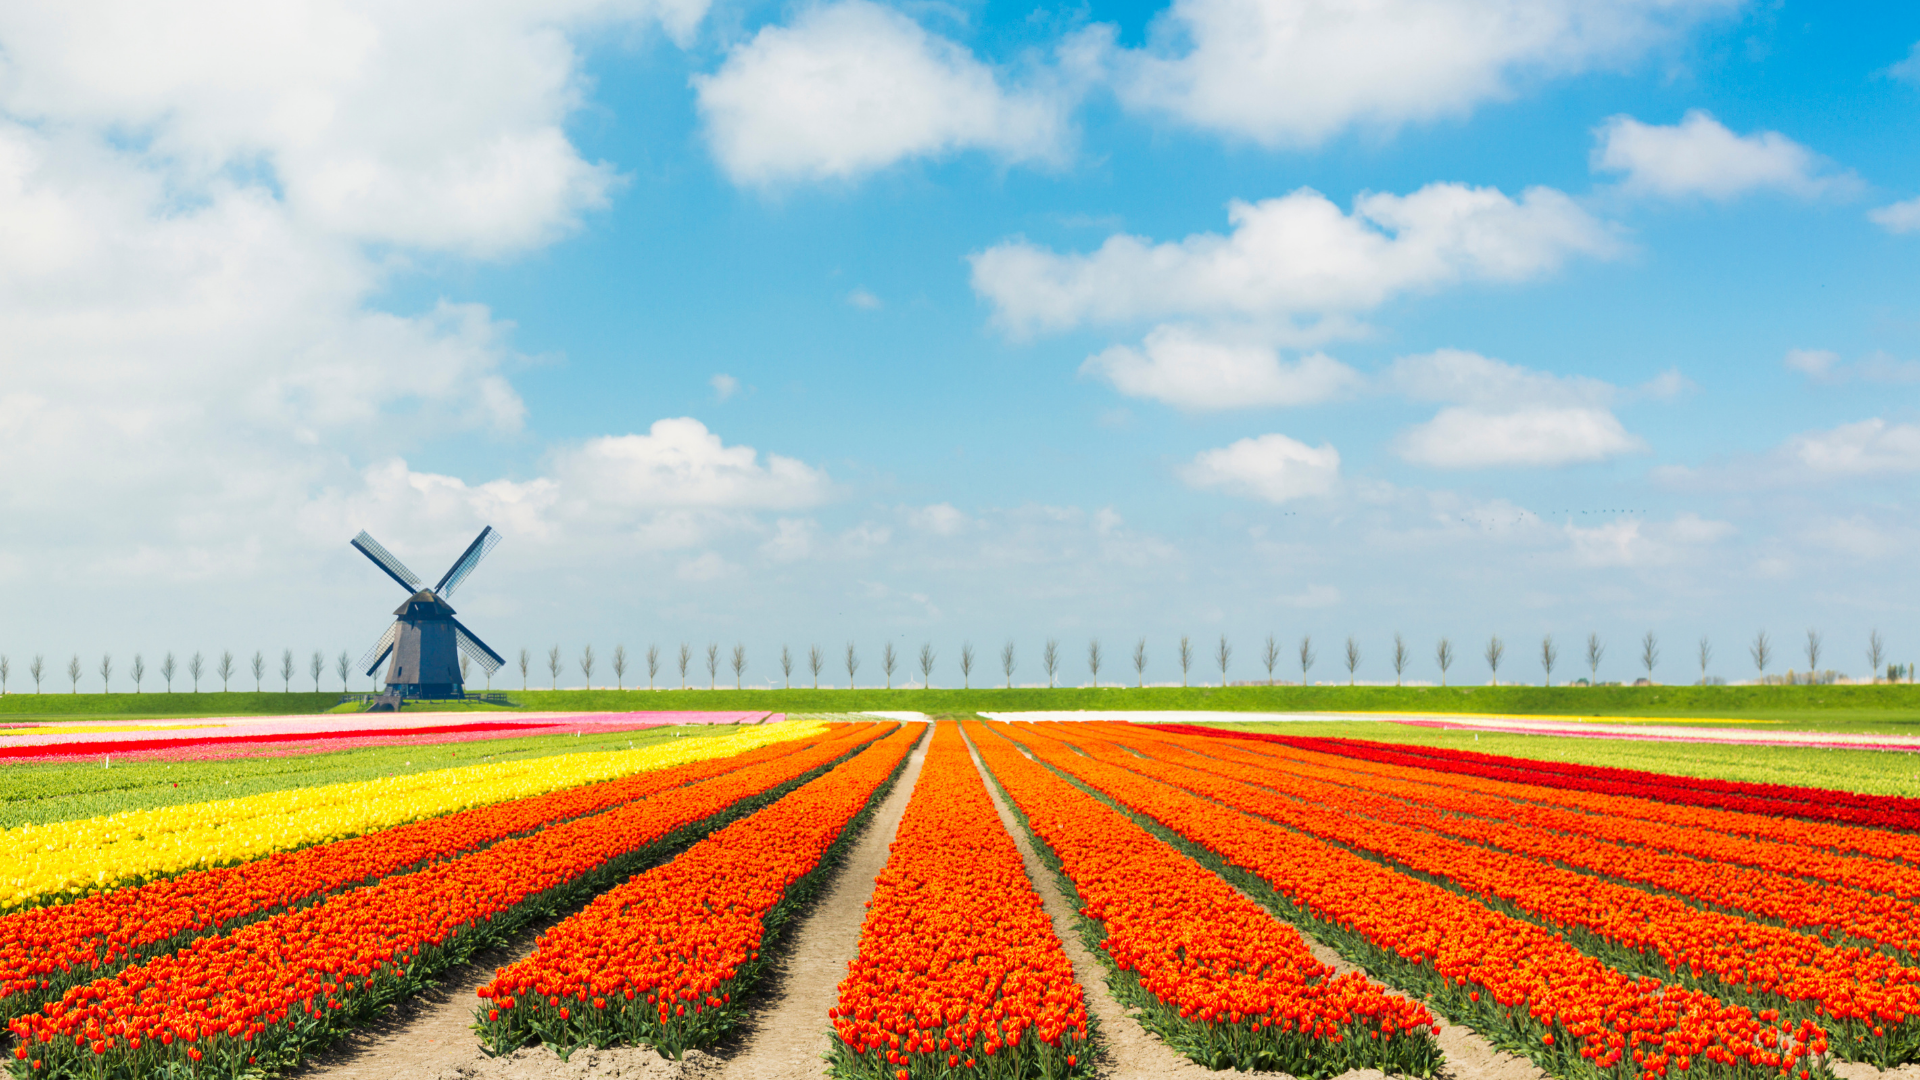 Tulip Fields in the Netherlands are one of the best photo-ops